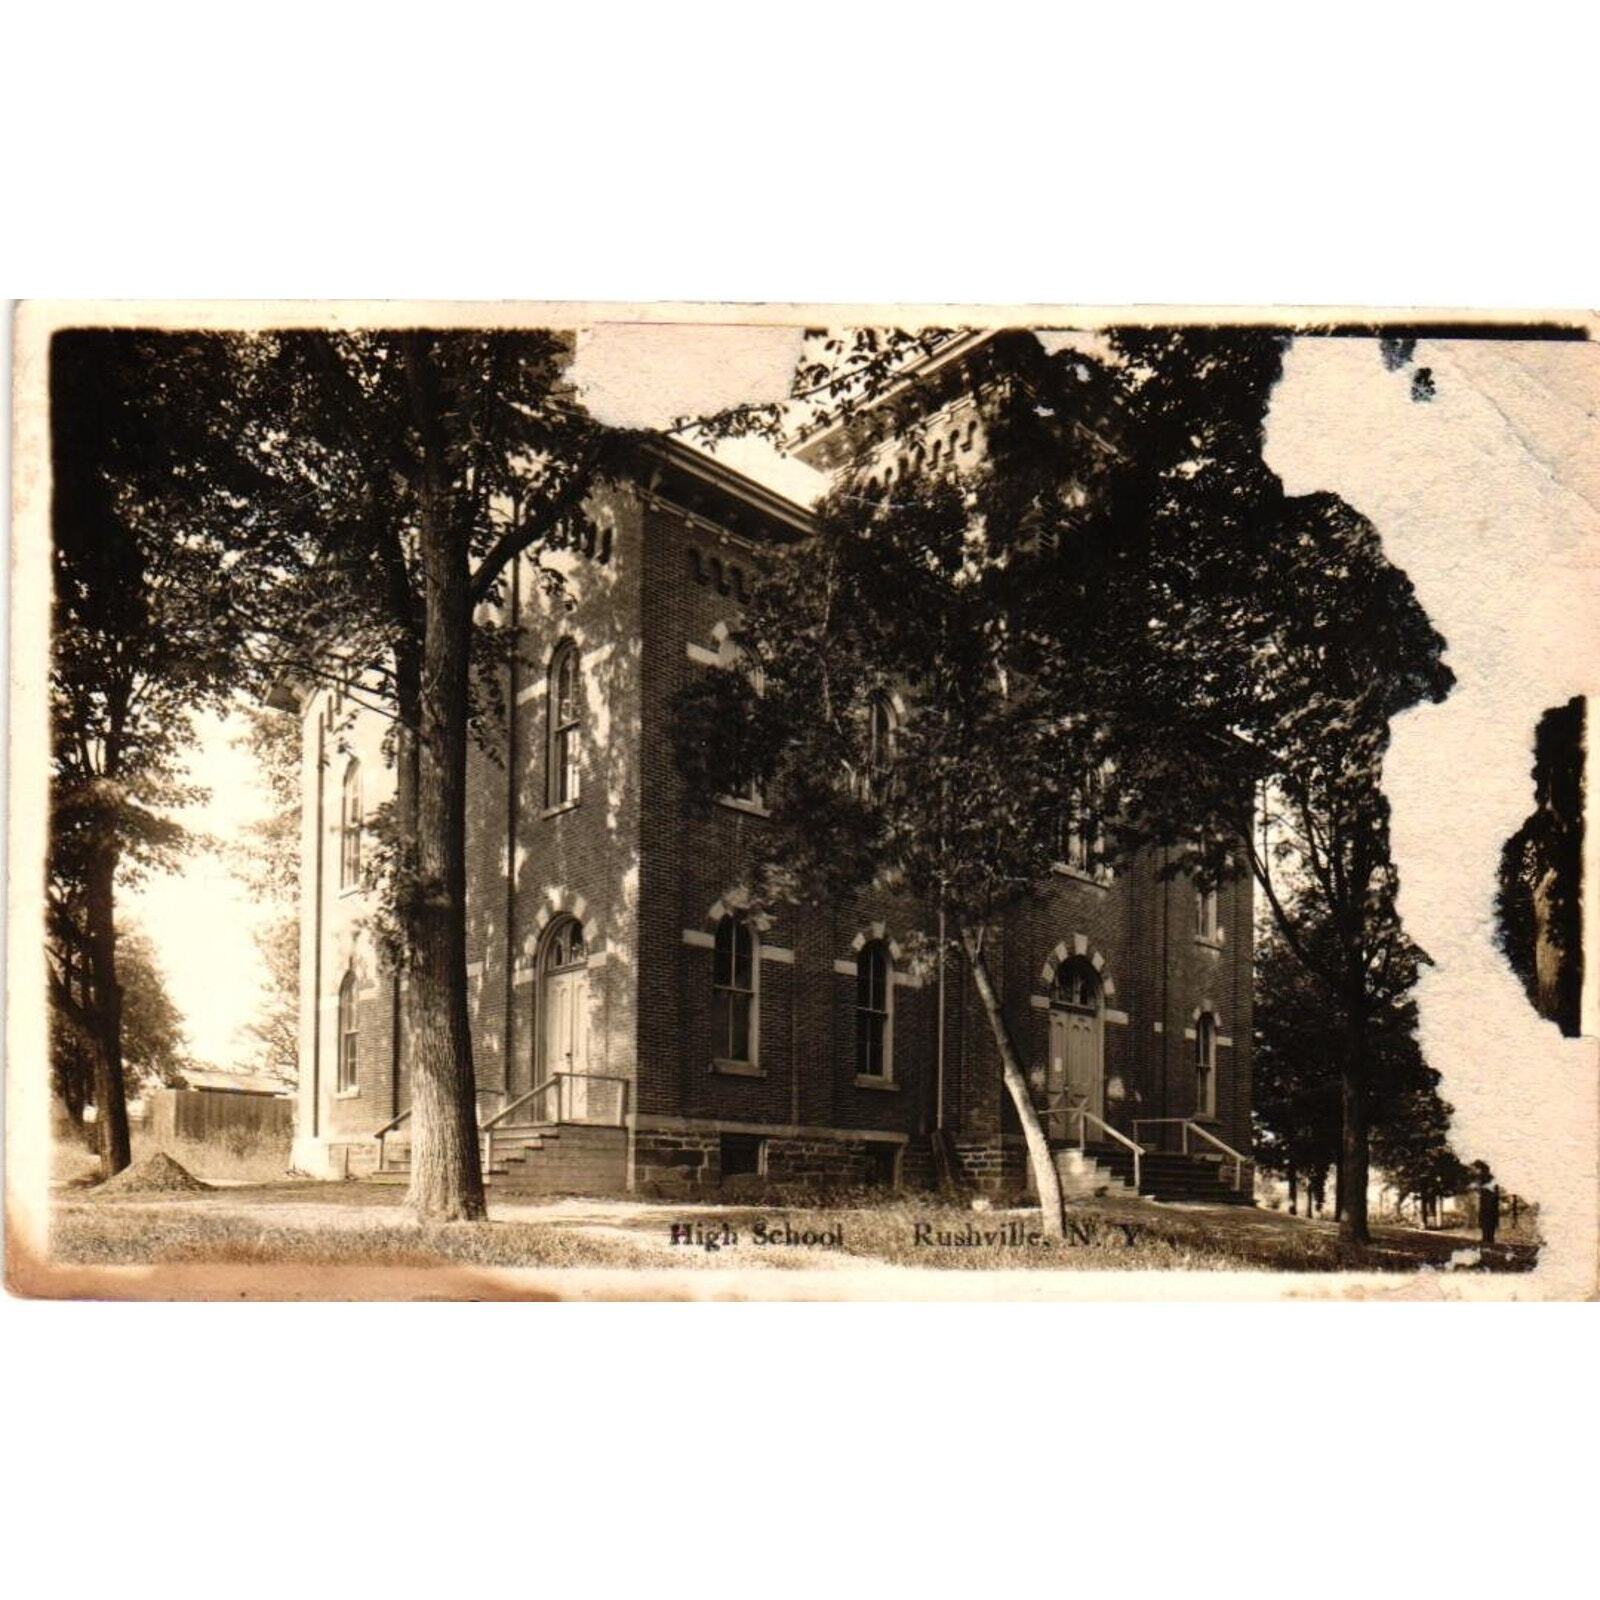 RPPC Rushville, New York High School Real Picture Postcard (2@1)